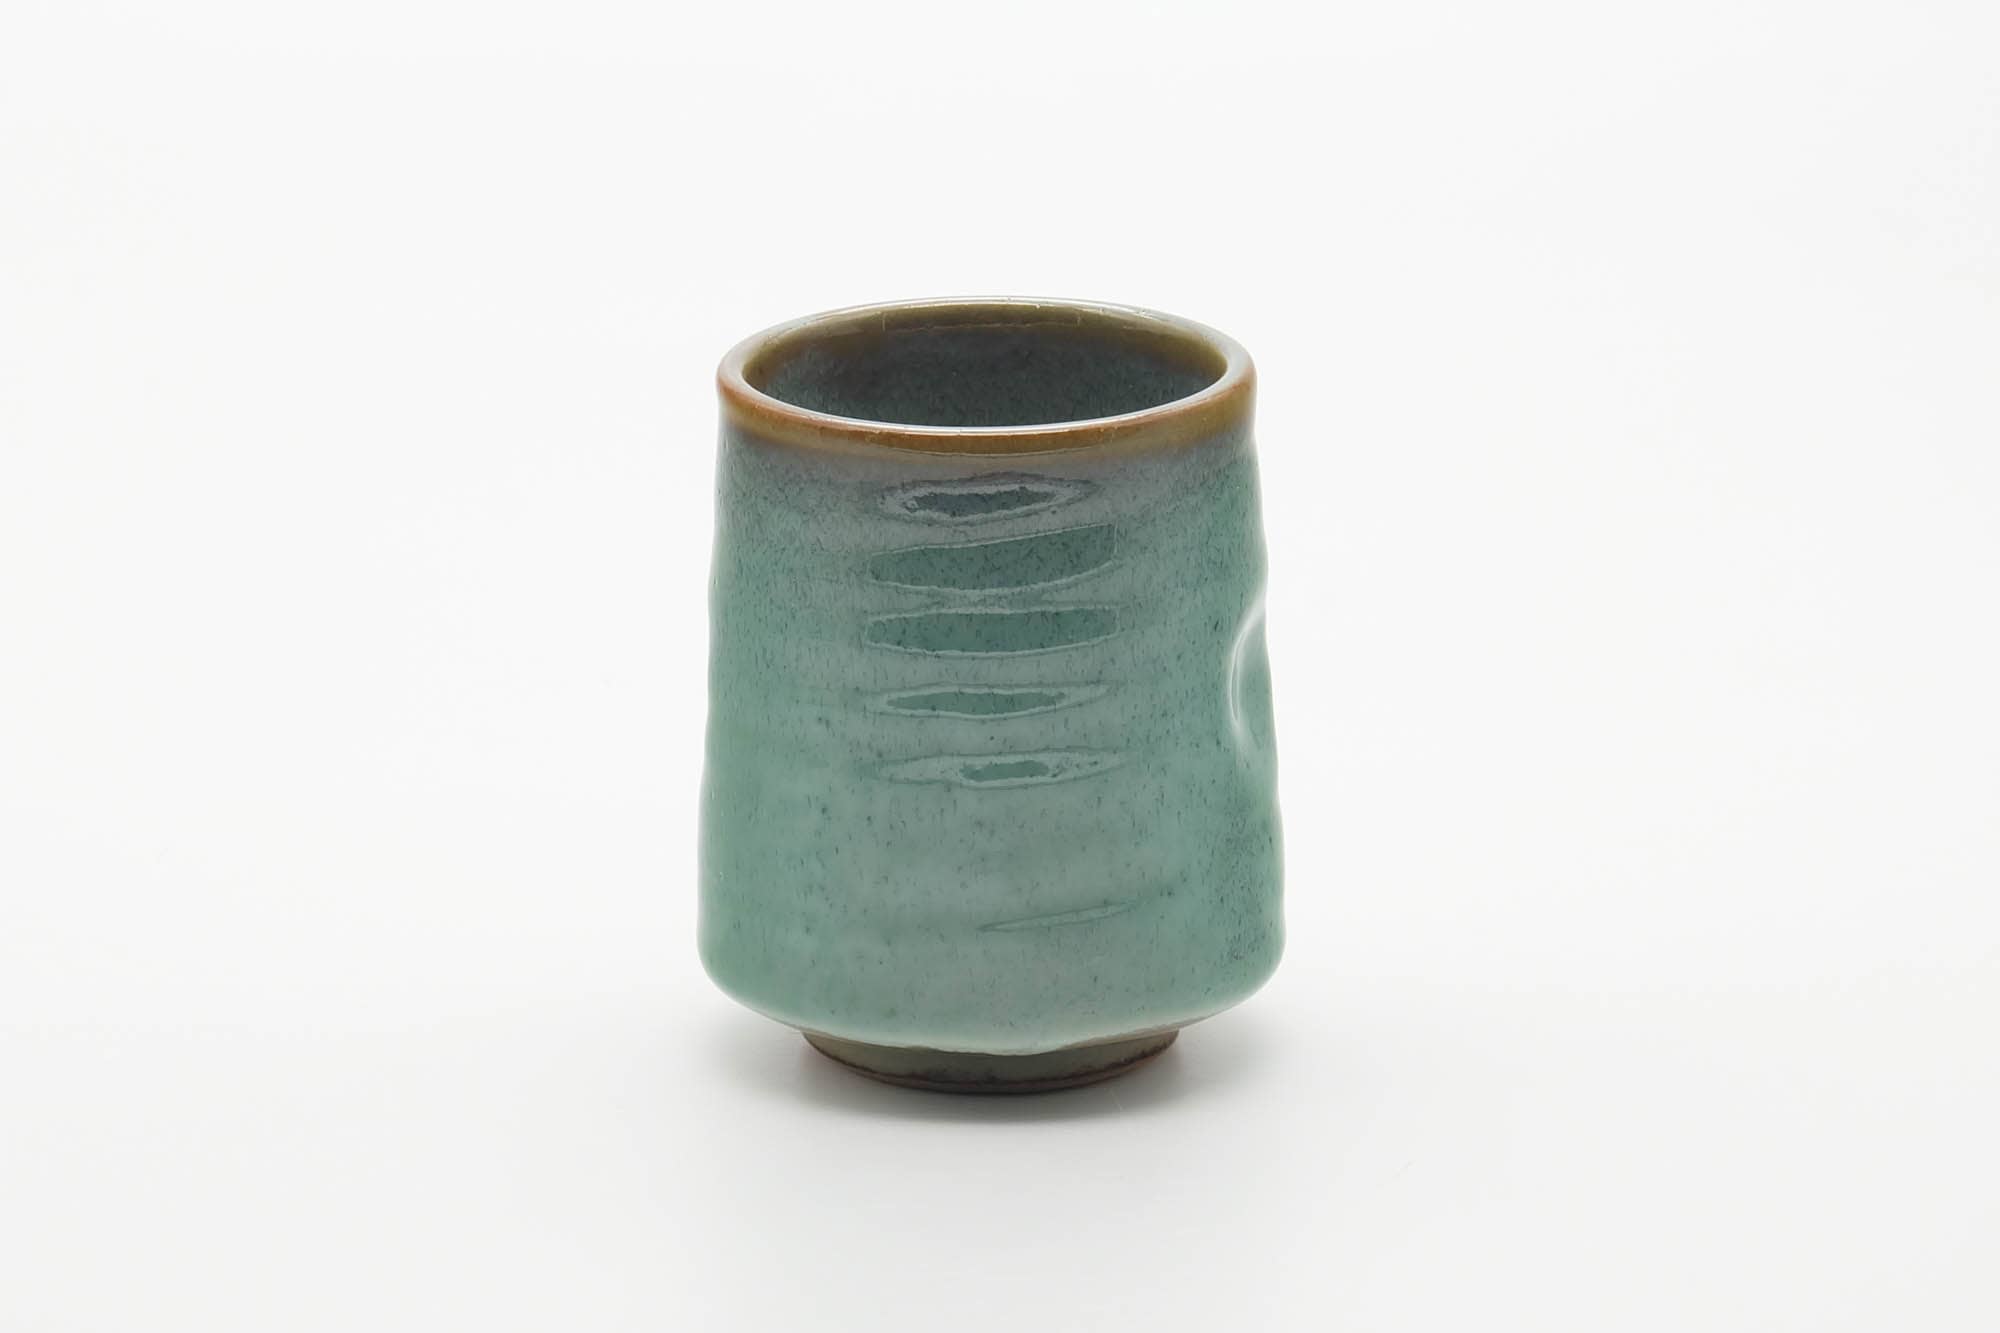 Japanese Teacup - Teal Speckled Thumb-Indented Yunomi - 180ml